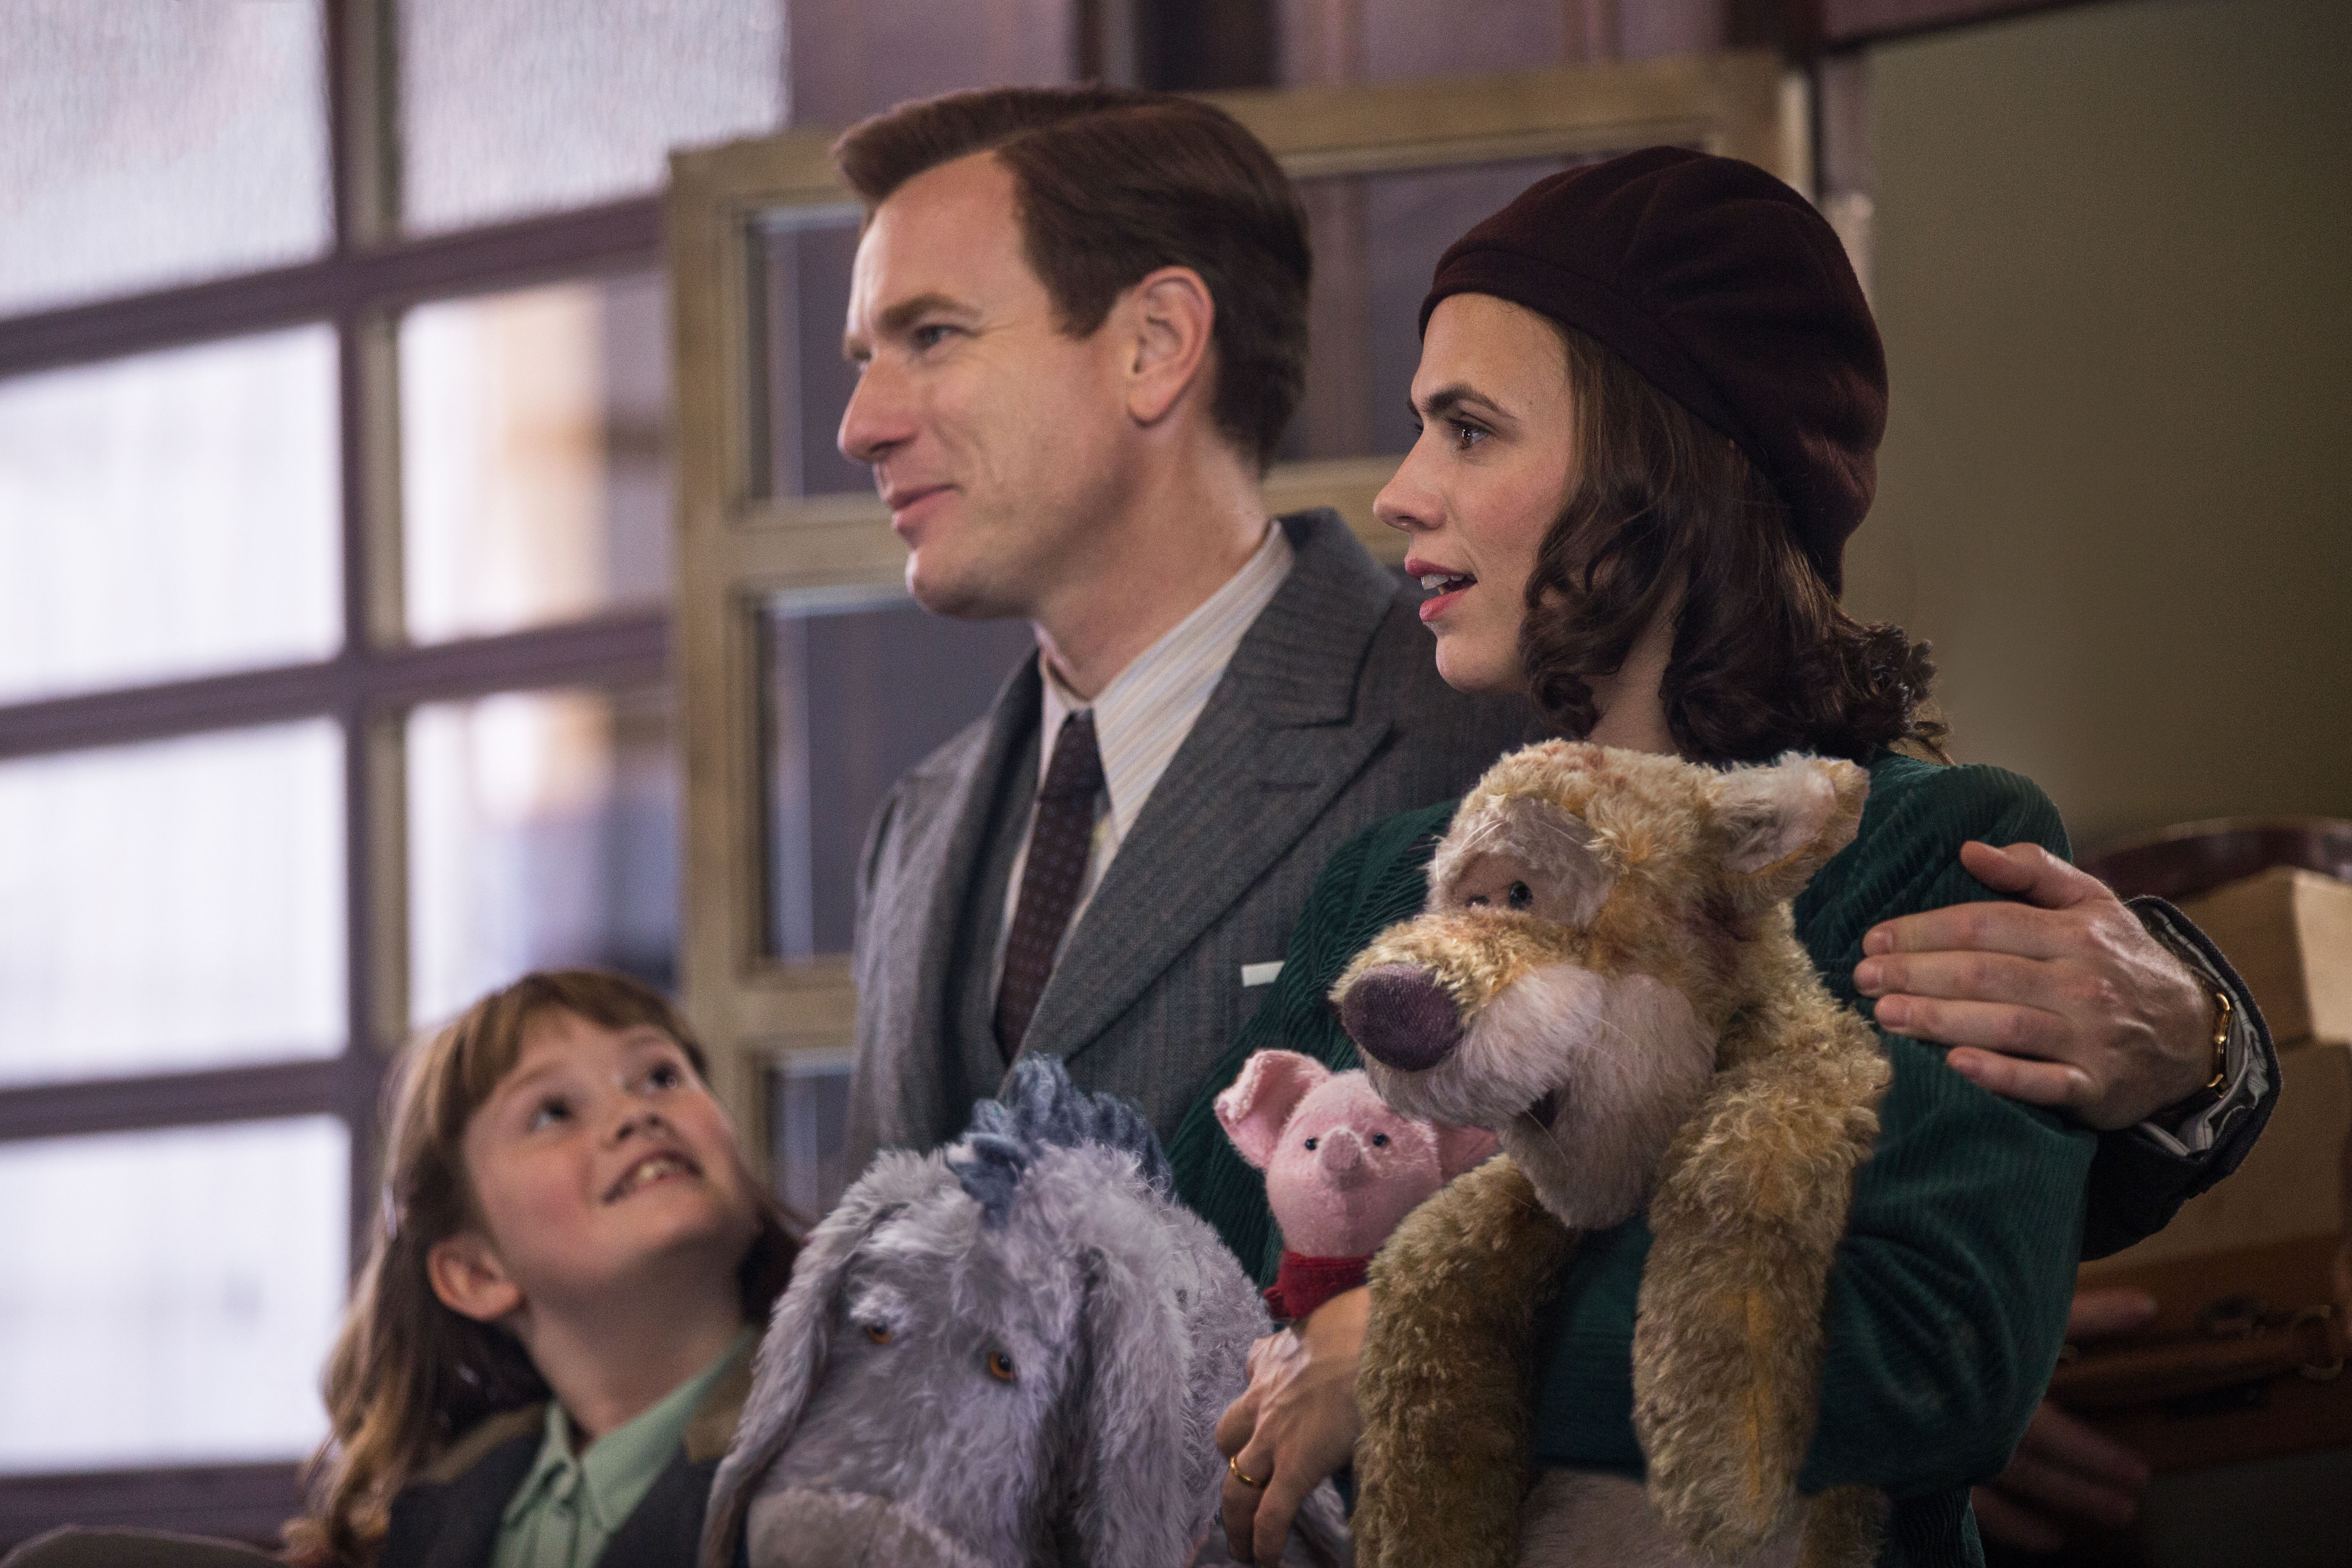 Christopher Robin – A Charming, Must-See Family Movie